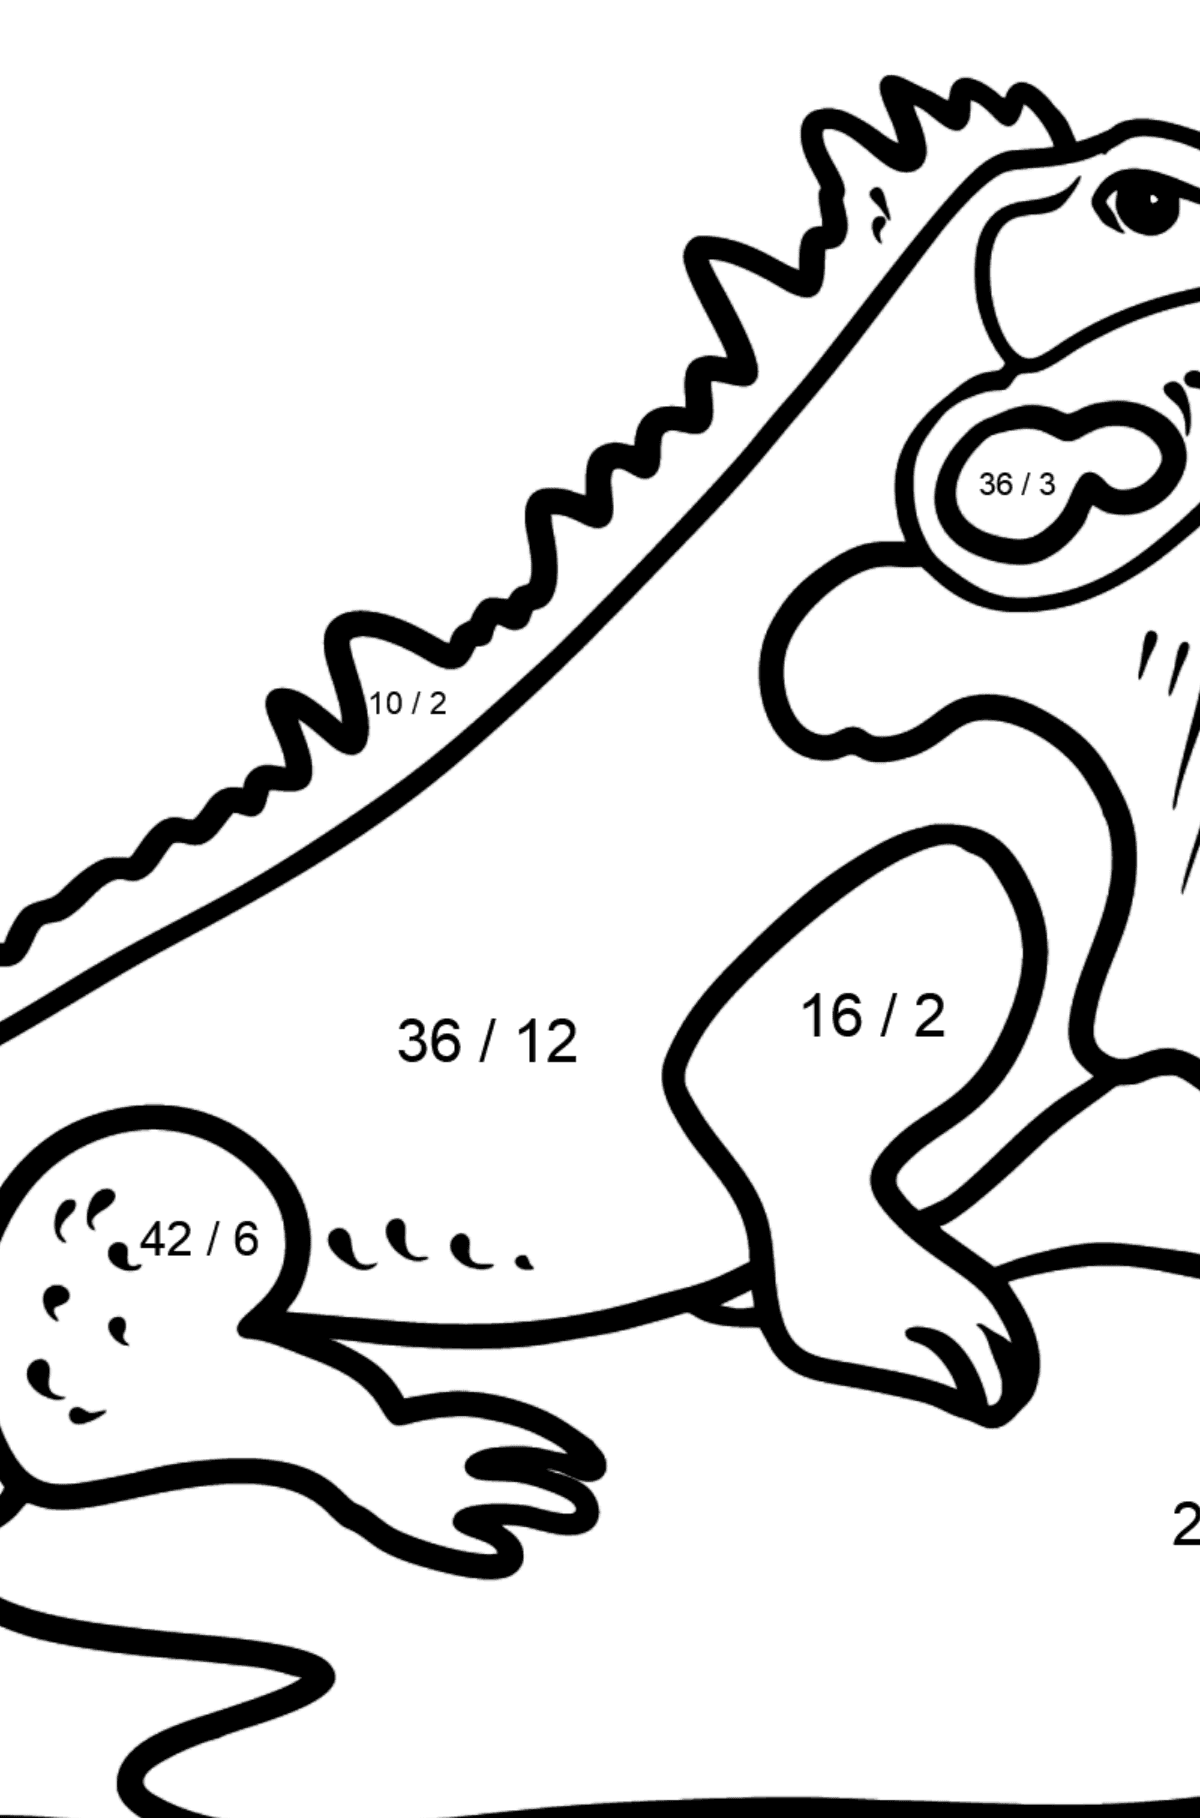 Spanish Letter I coloring pages - IGUANA - Math Coloring - Division for Kids